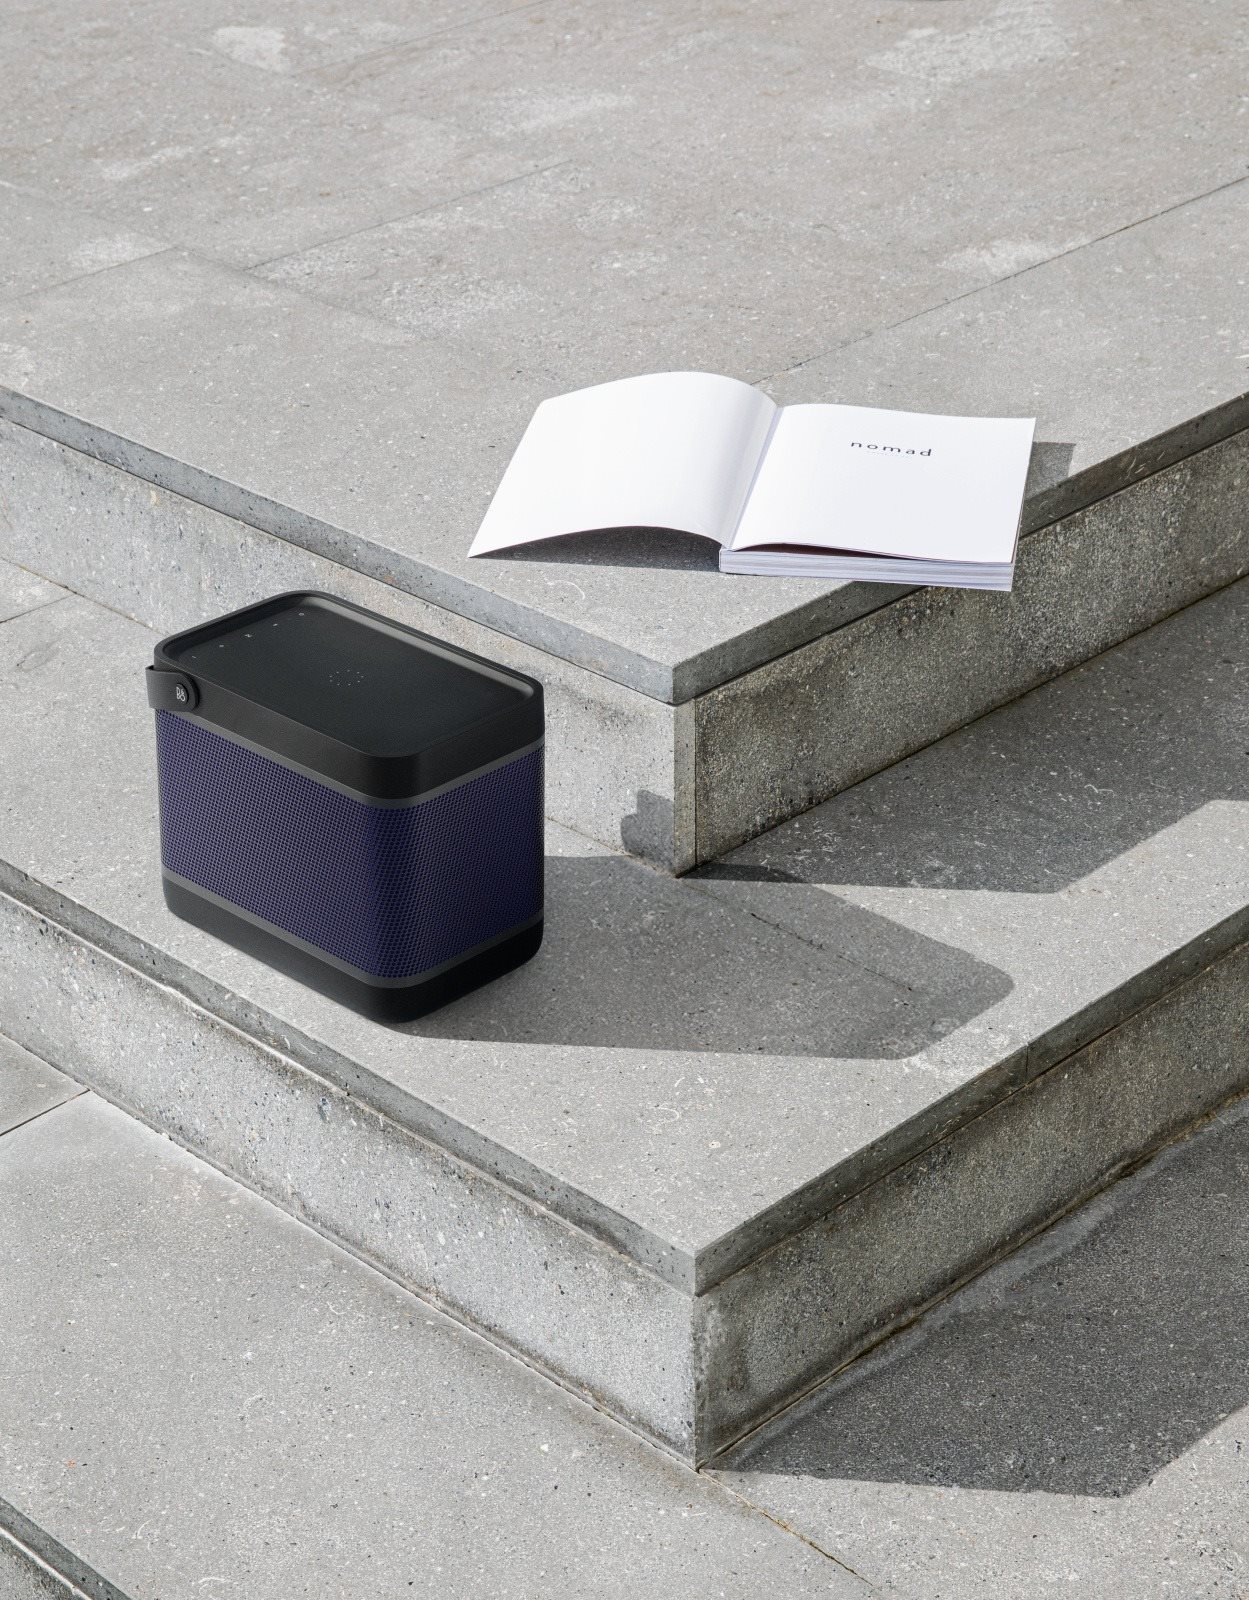 Bluetooth Speaker Bang & Olufsen Beoplay Beolit 20, Black Anthracite Lifestyle